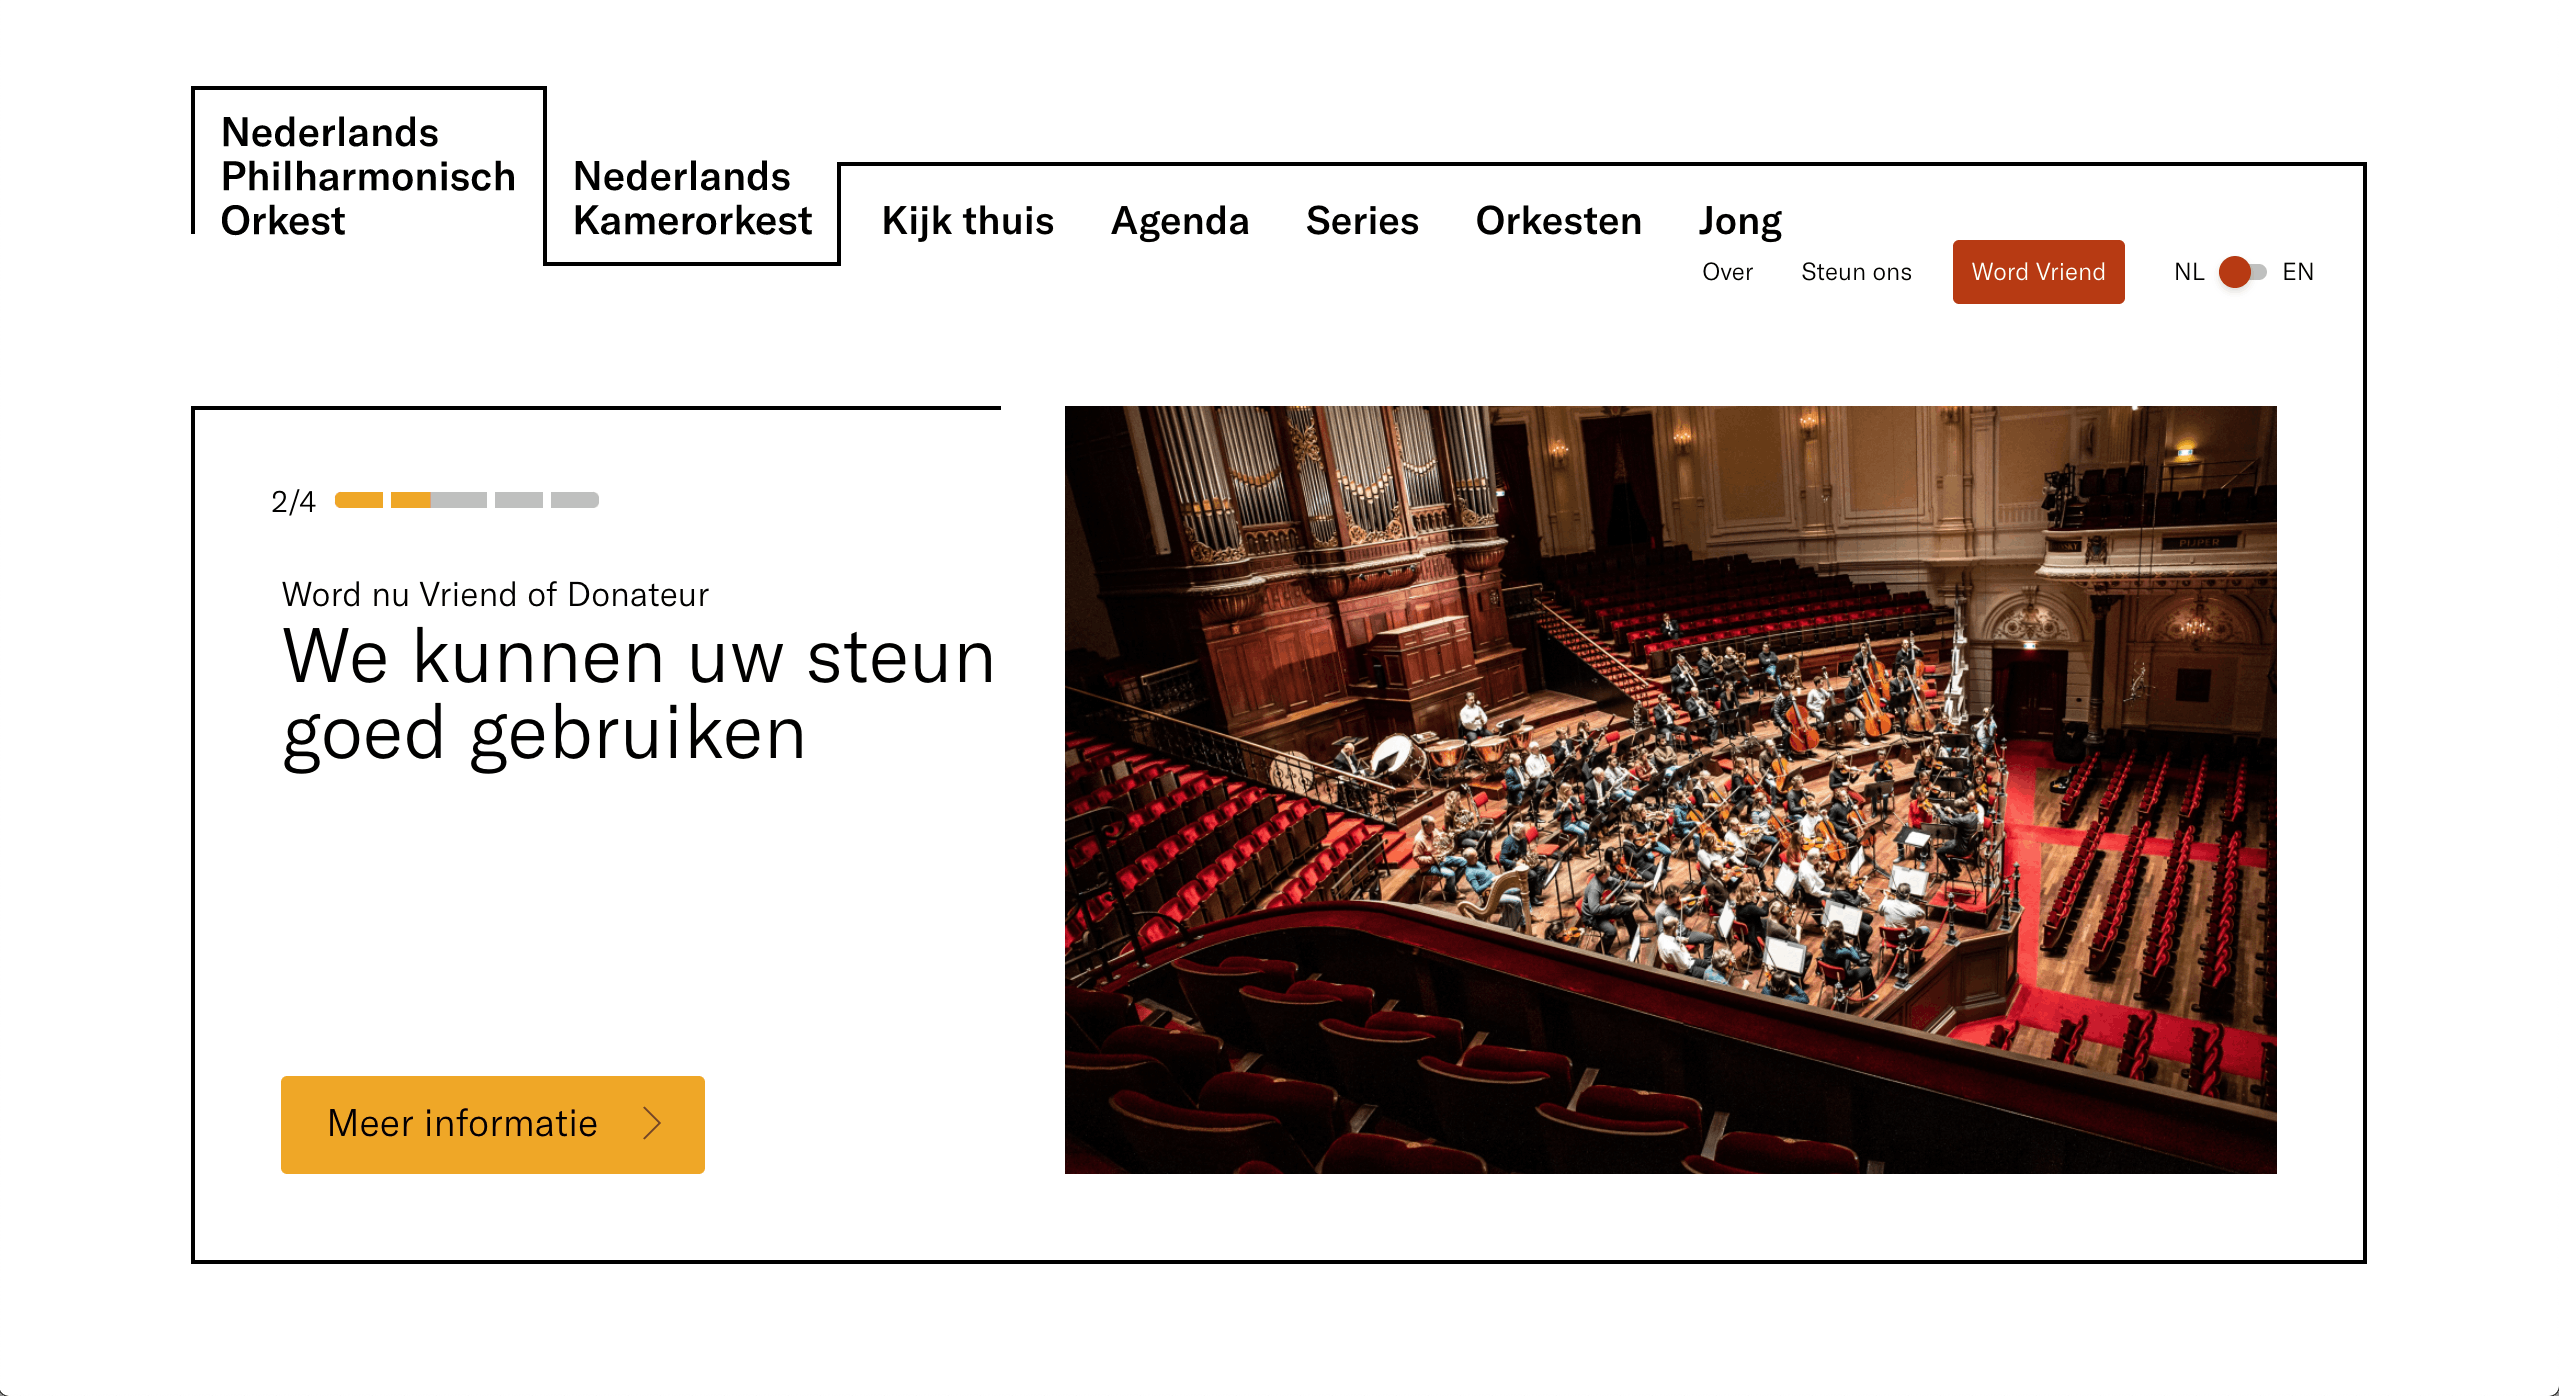 Image showcasing the Orkest project